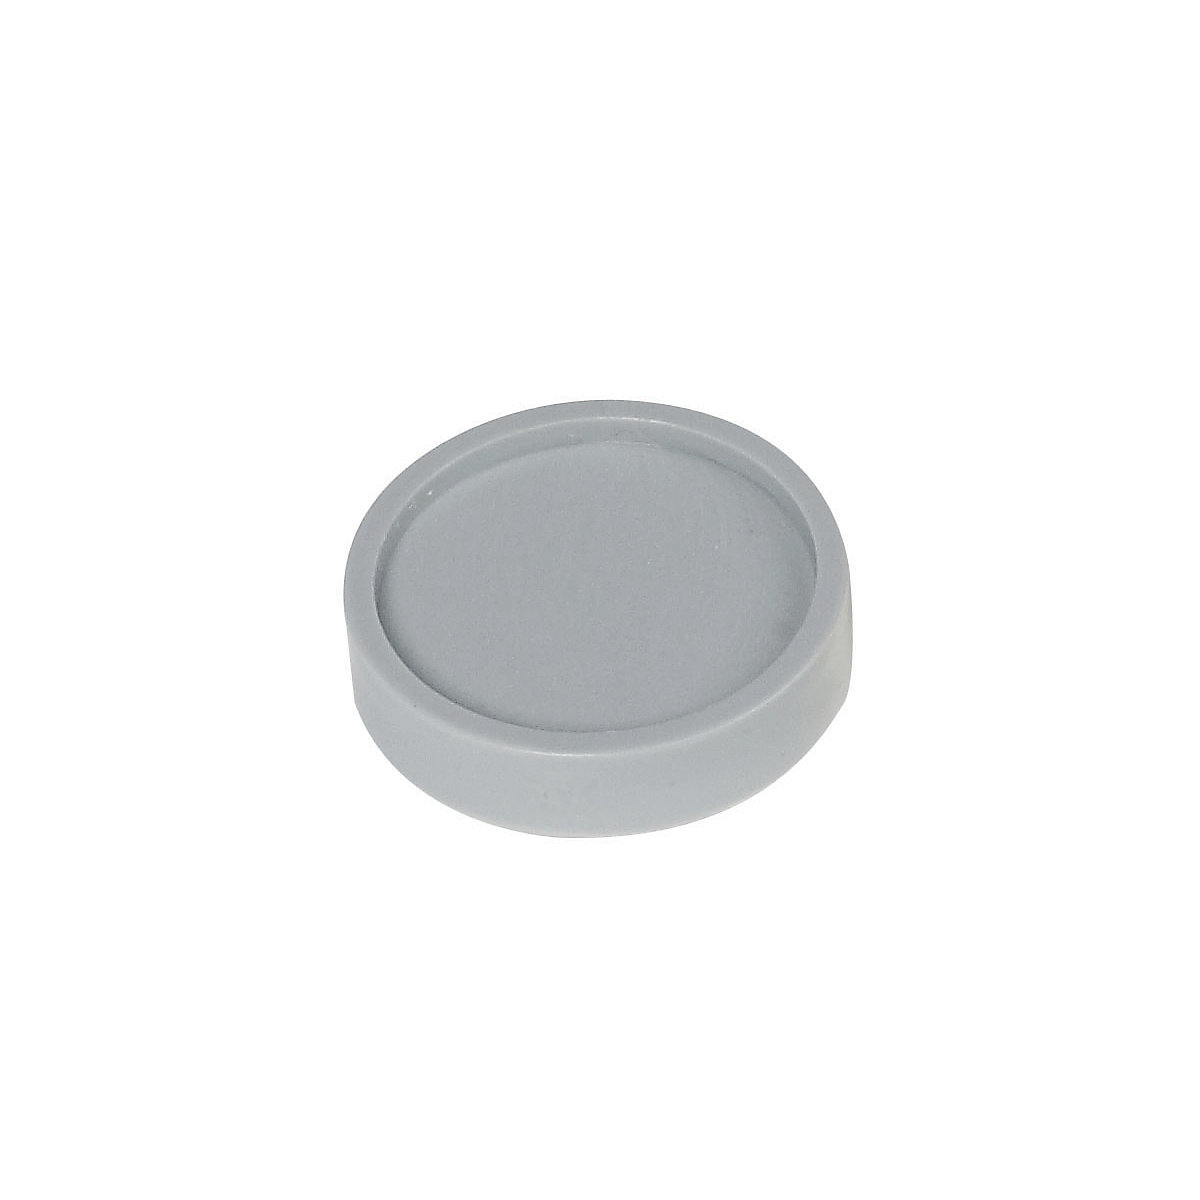 Round magnets – MAUL, Ø 30 mm, pack of 100, grey-5